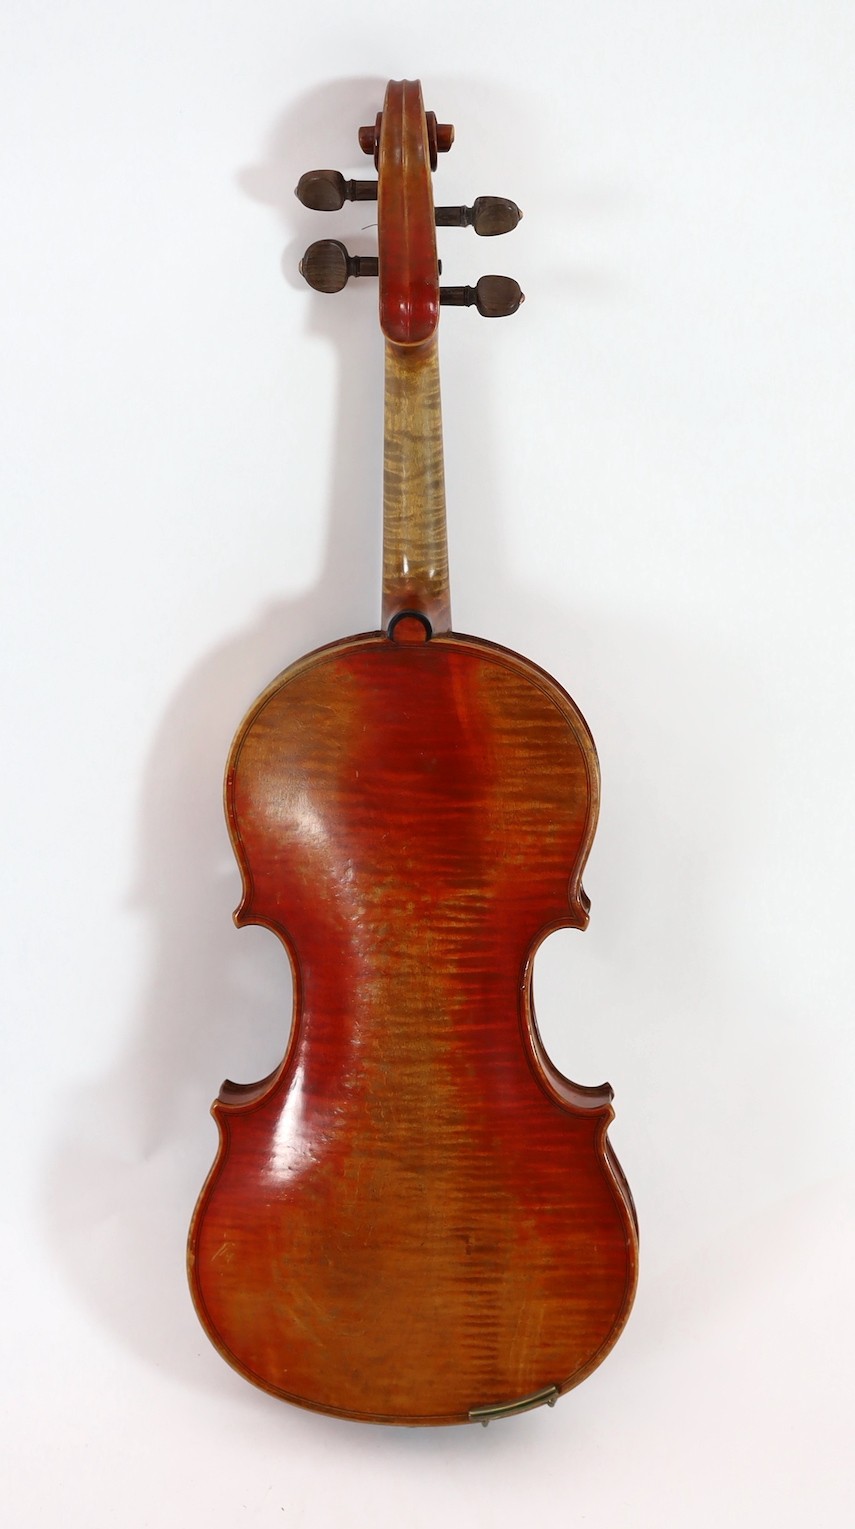 W.E.Hill & Son. An early 20th century violin bow, 74cm, violin back 37cm, overall is 59cm